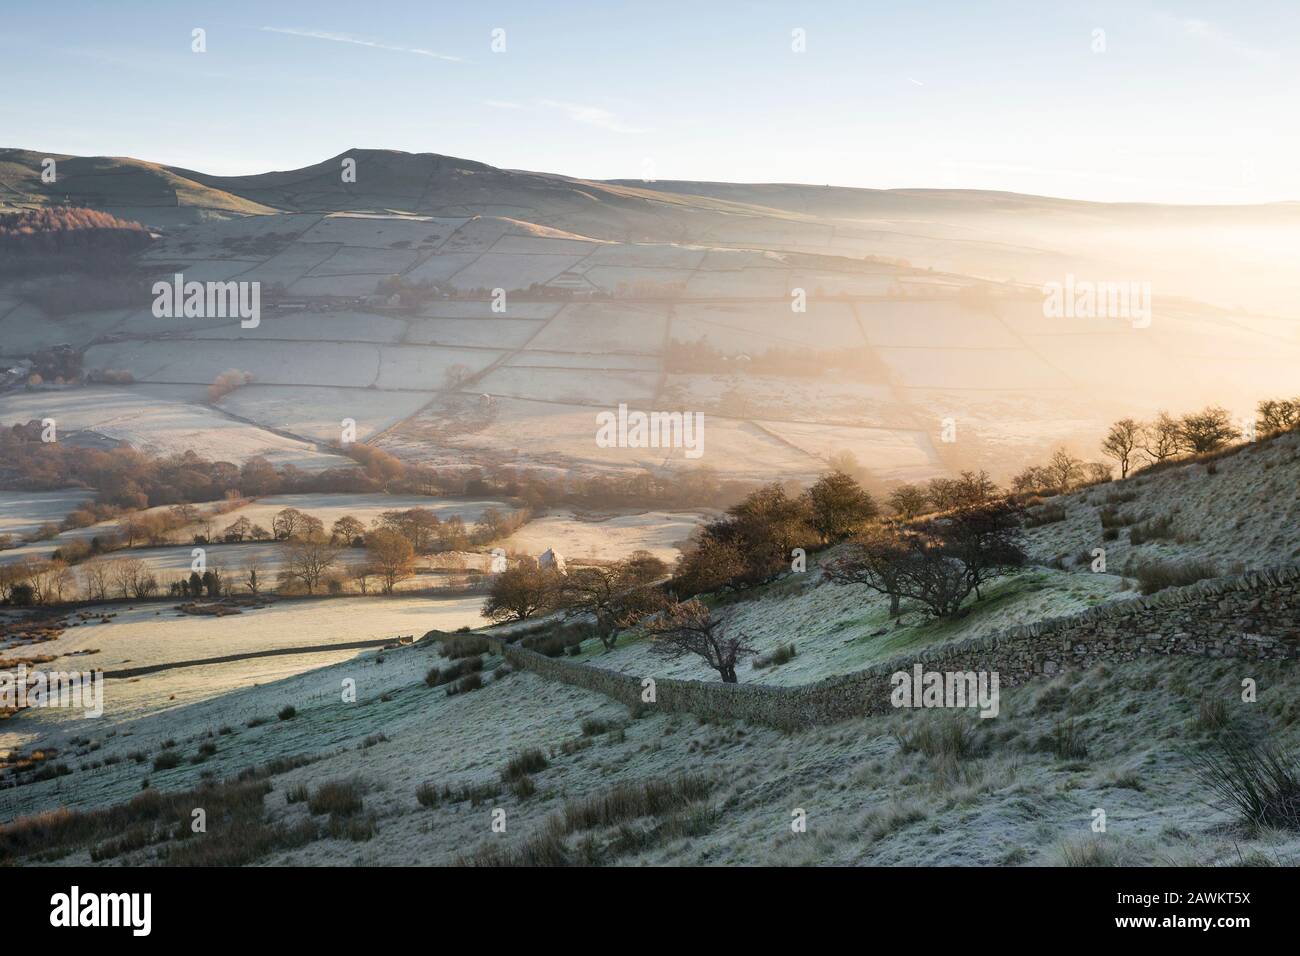 Dry stone wall on a frosty, winter morning at Cracken Edge in the High Peak District, England Stock Photo